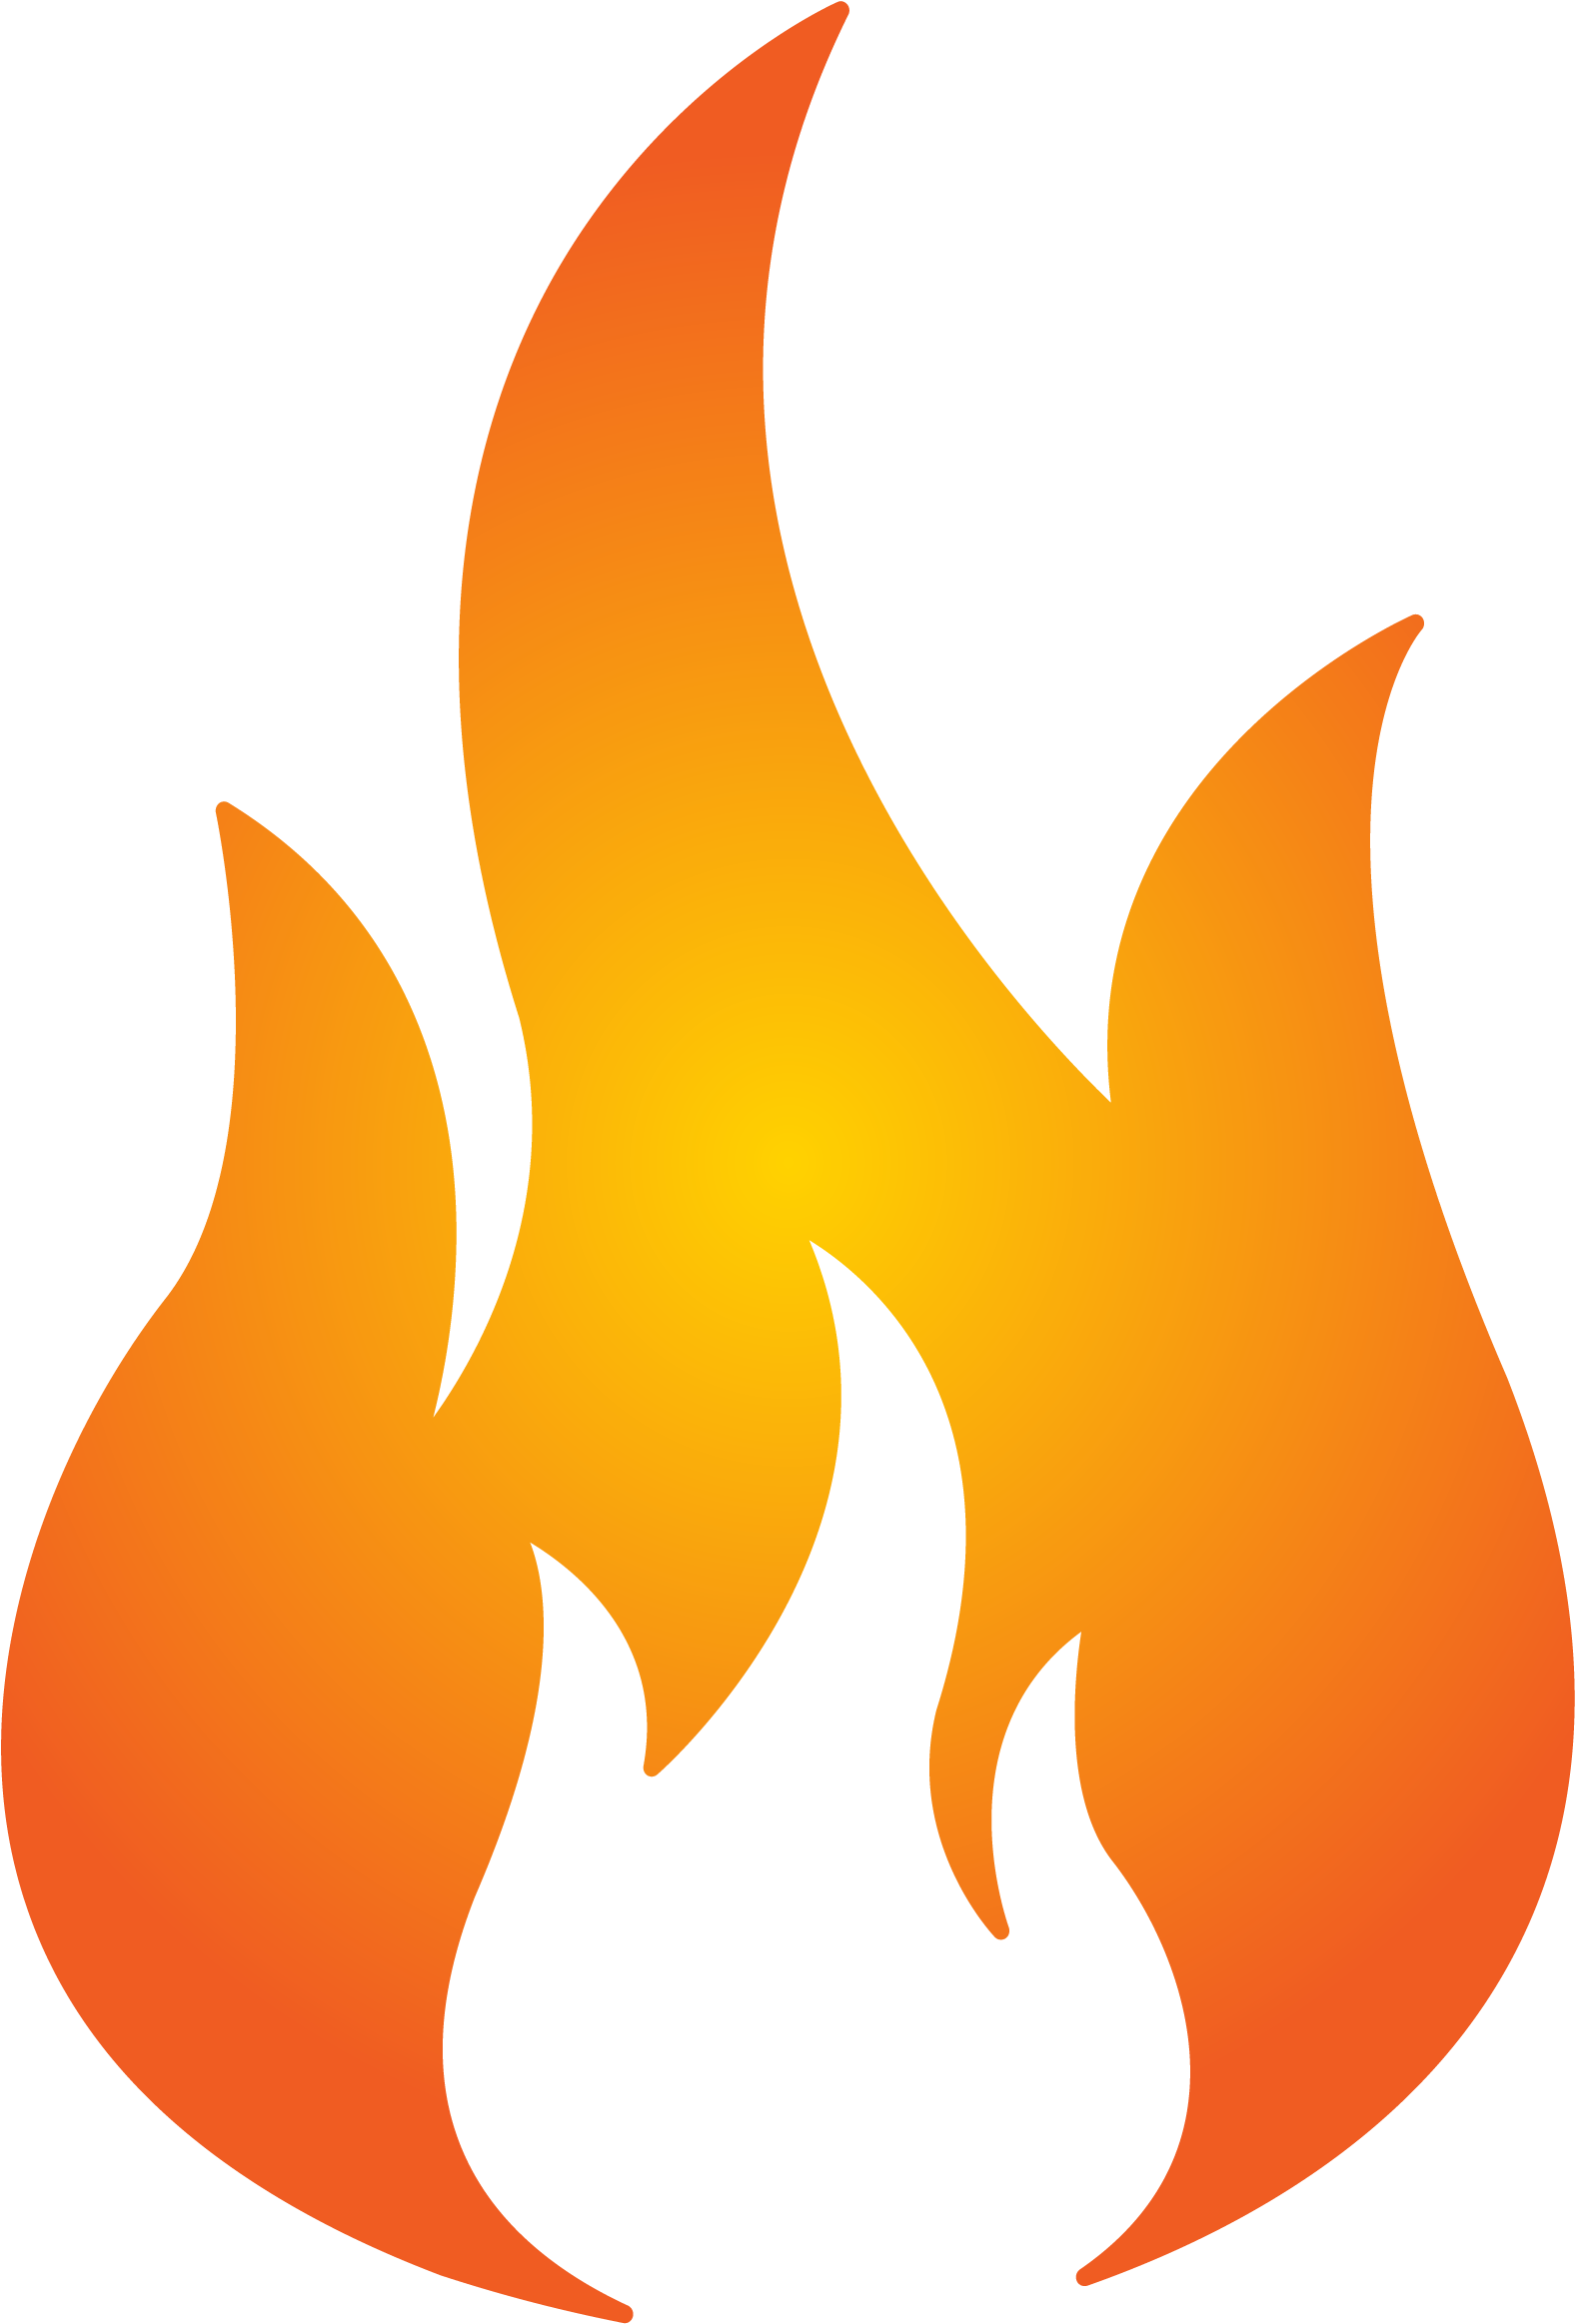 Fireplace Warehouse Icon - Fire Rated Symbol (2325x2325)